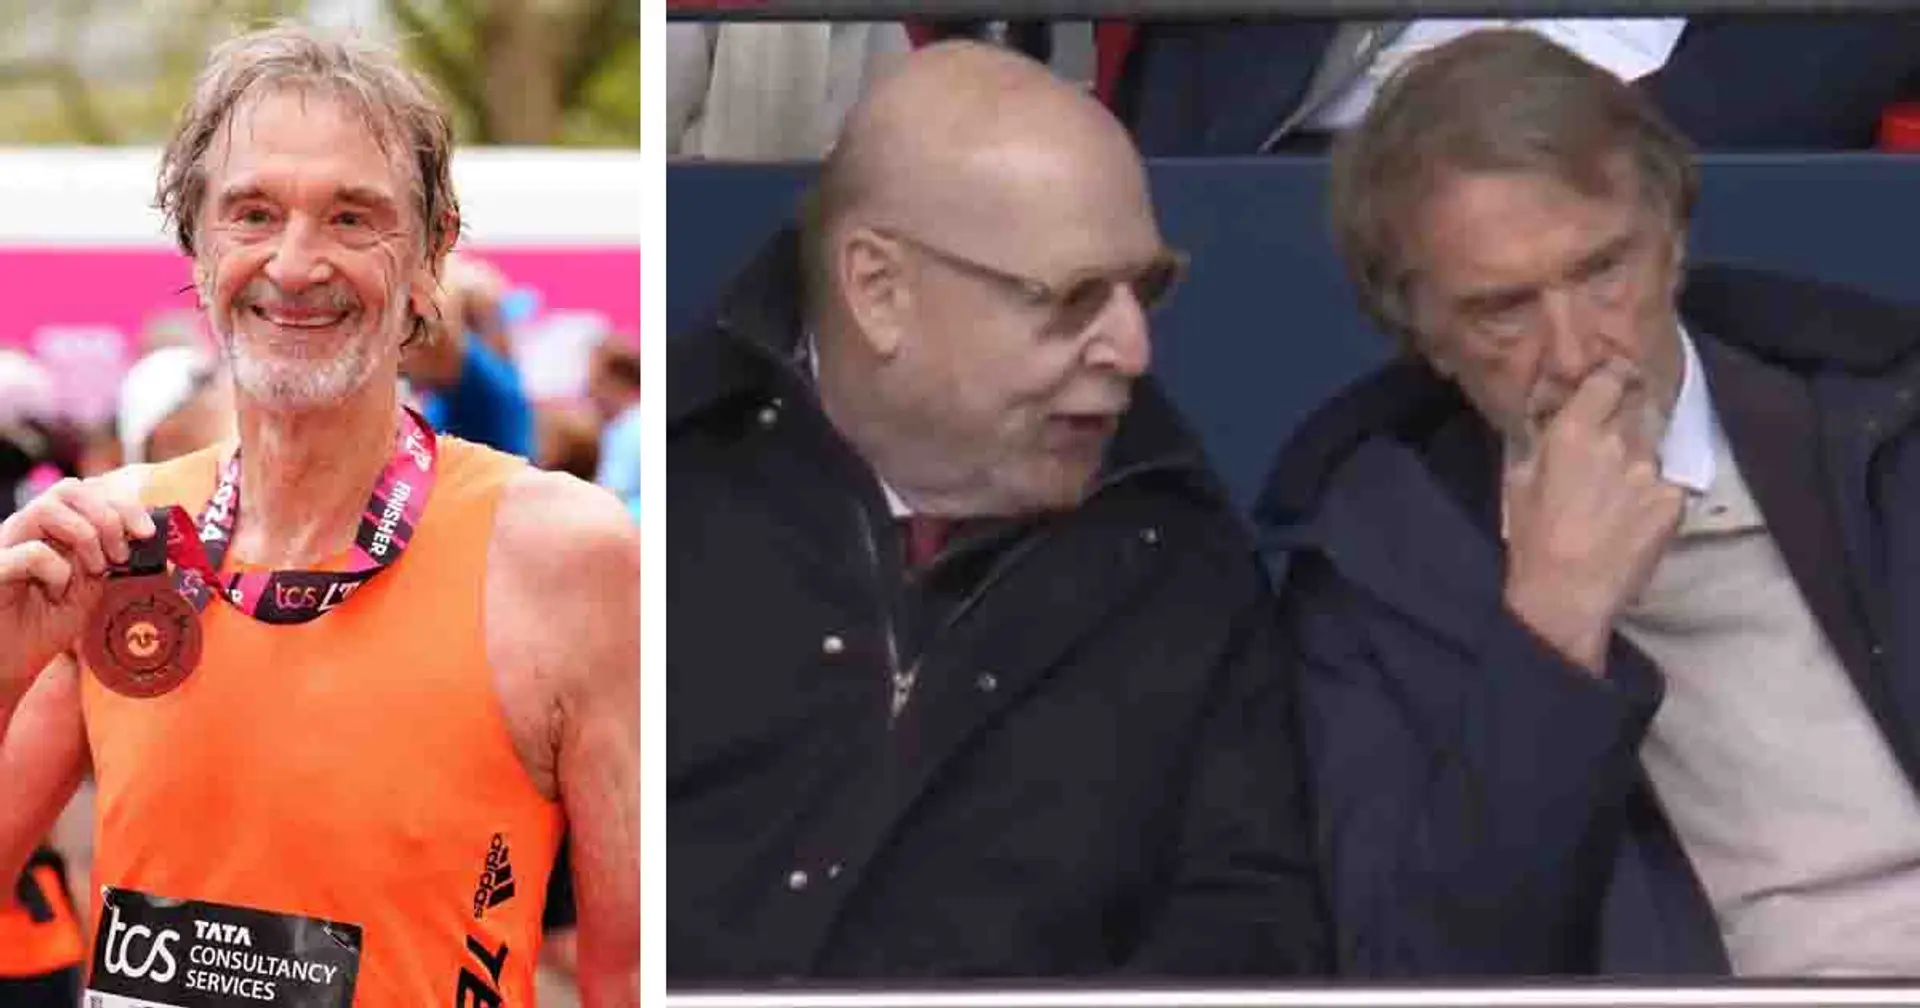 71-year-old Sir Jim Ratcliffe sets personal record in London Marathon before rocking up at Wembley to watch Man United